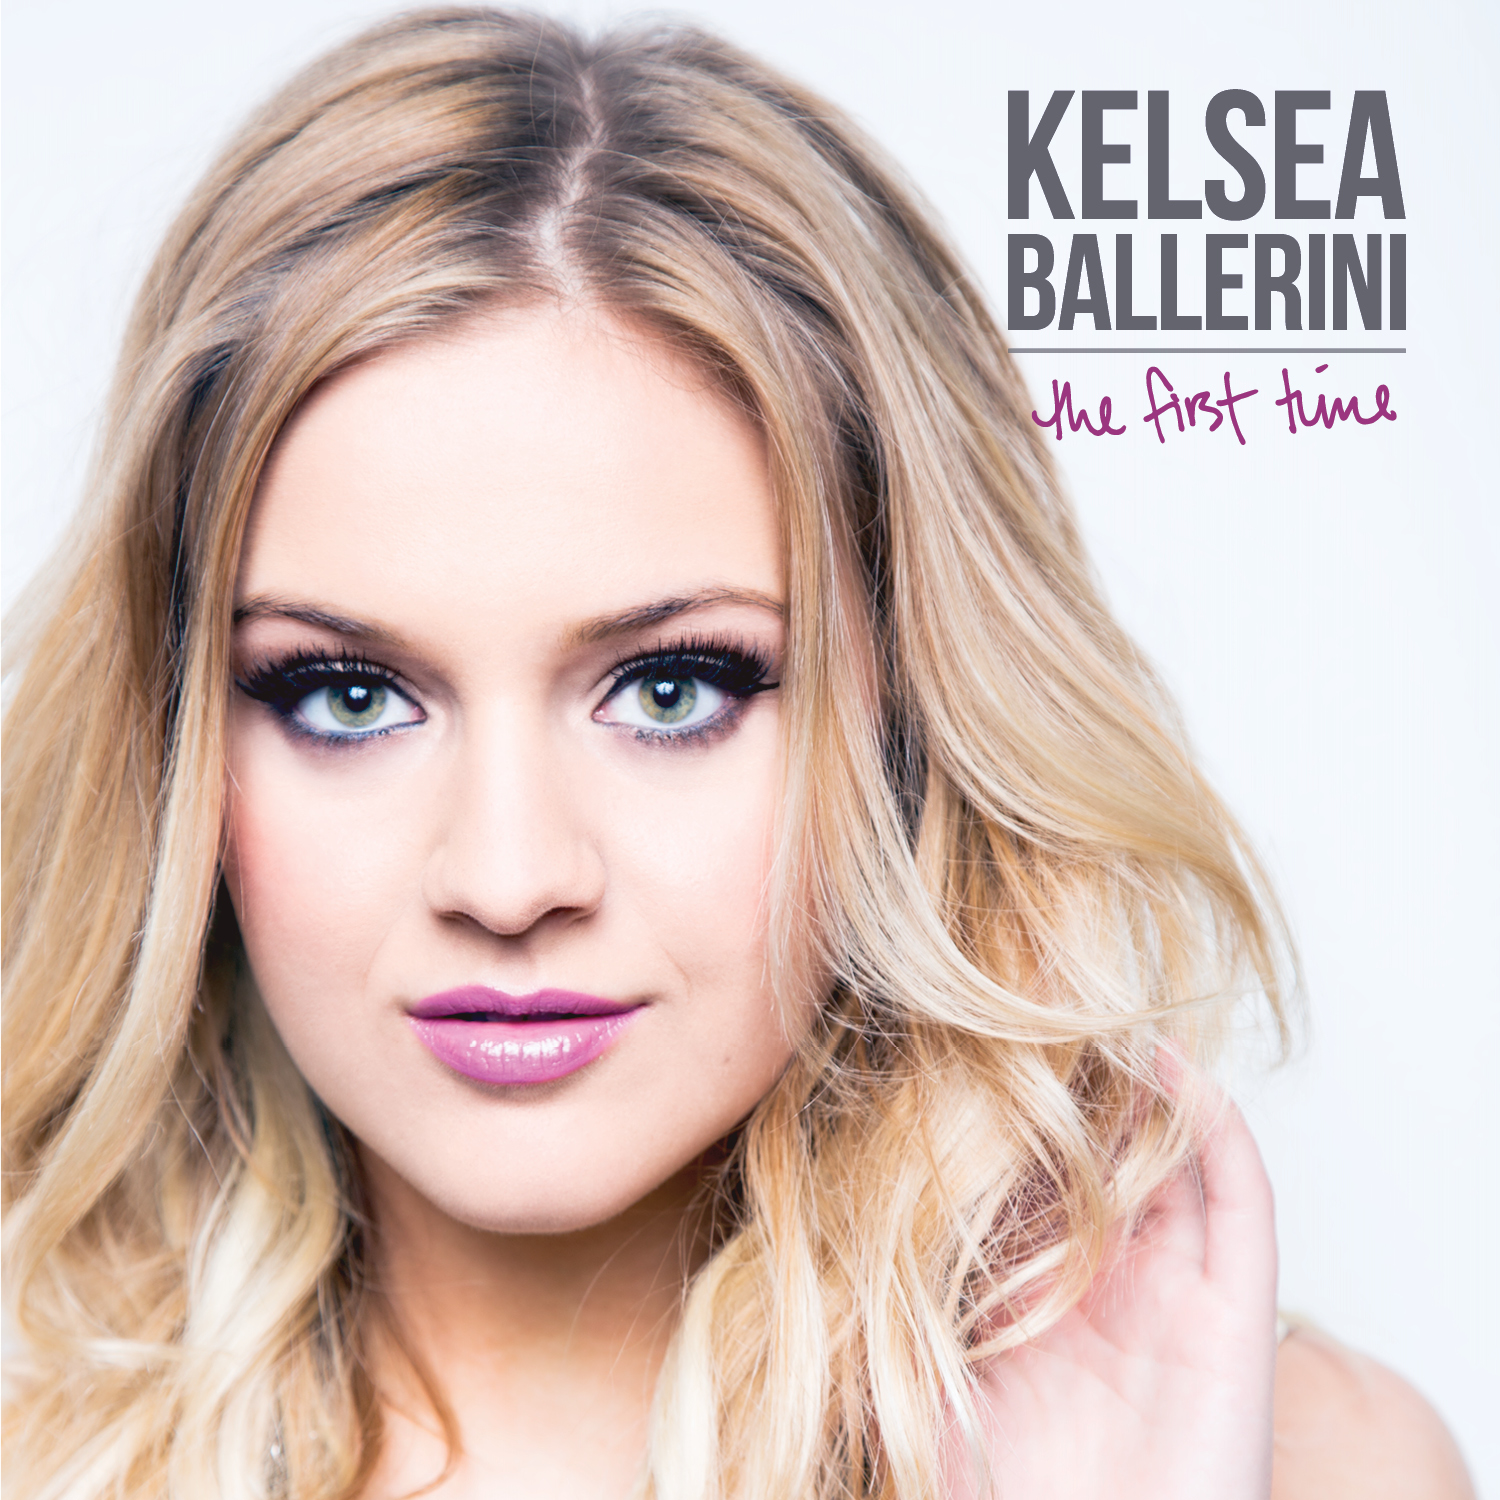 Album Review Kelsea Ballerini ‘The First Time’ FOCUS on the 615